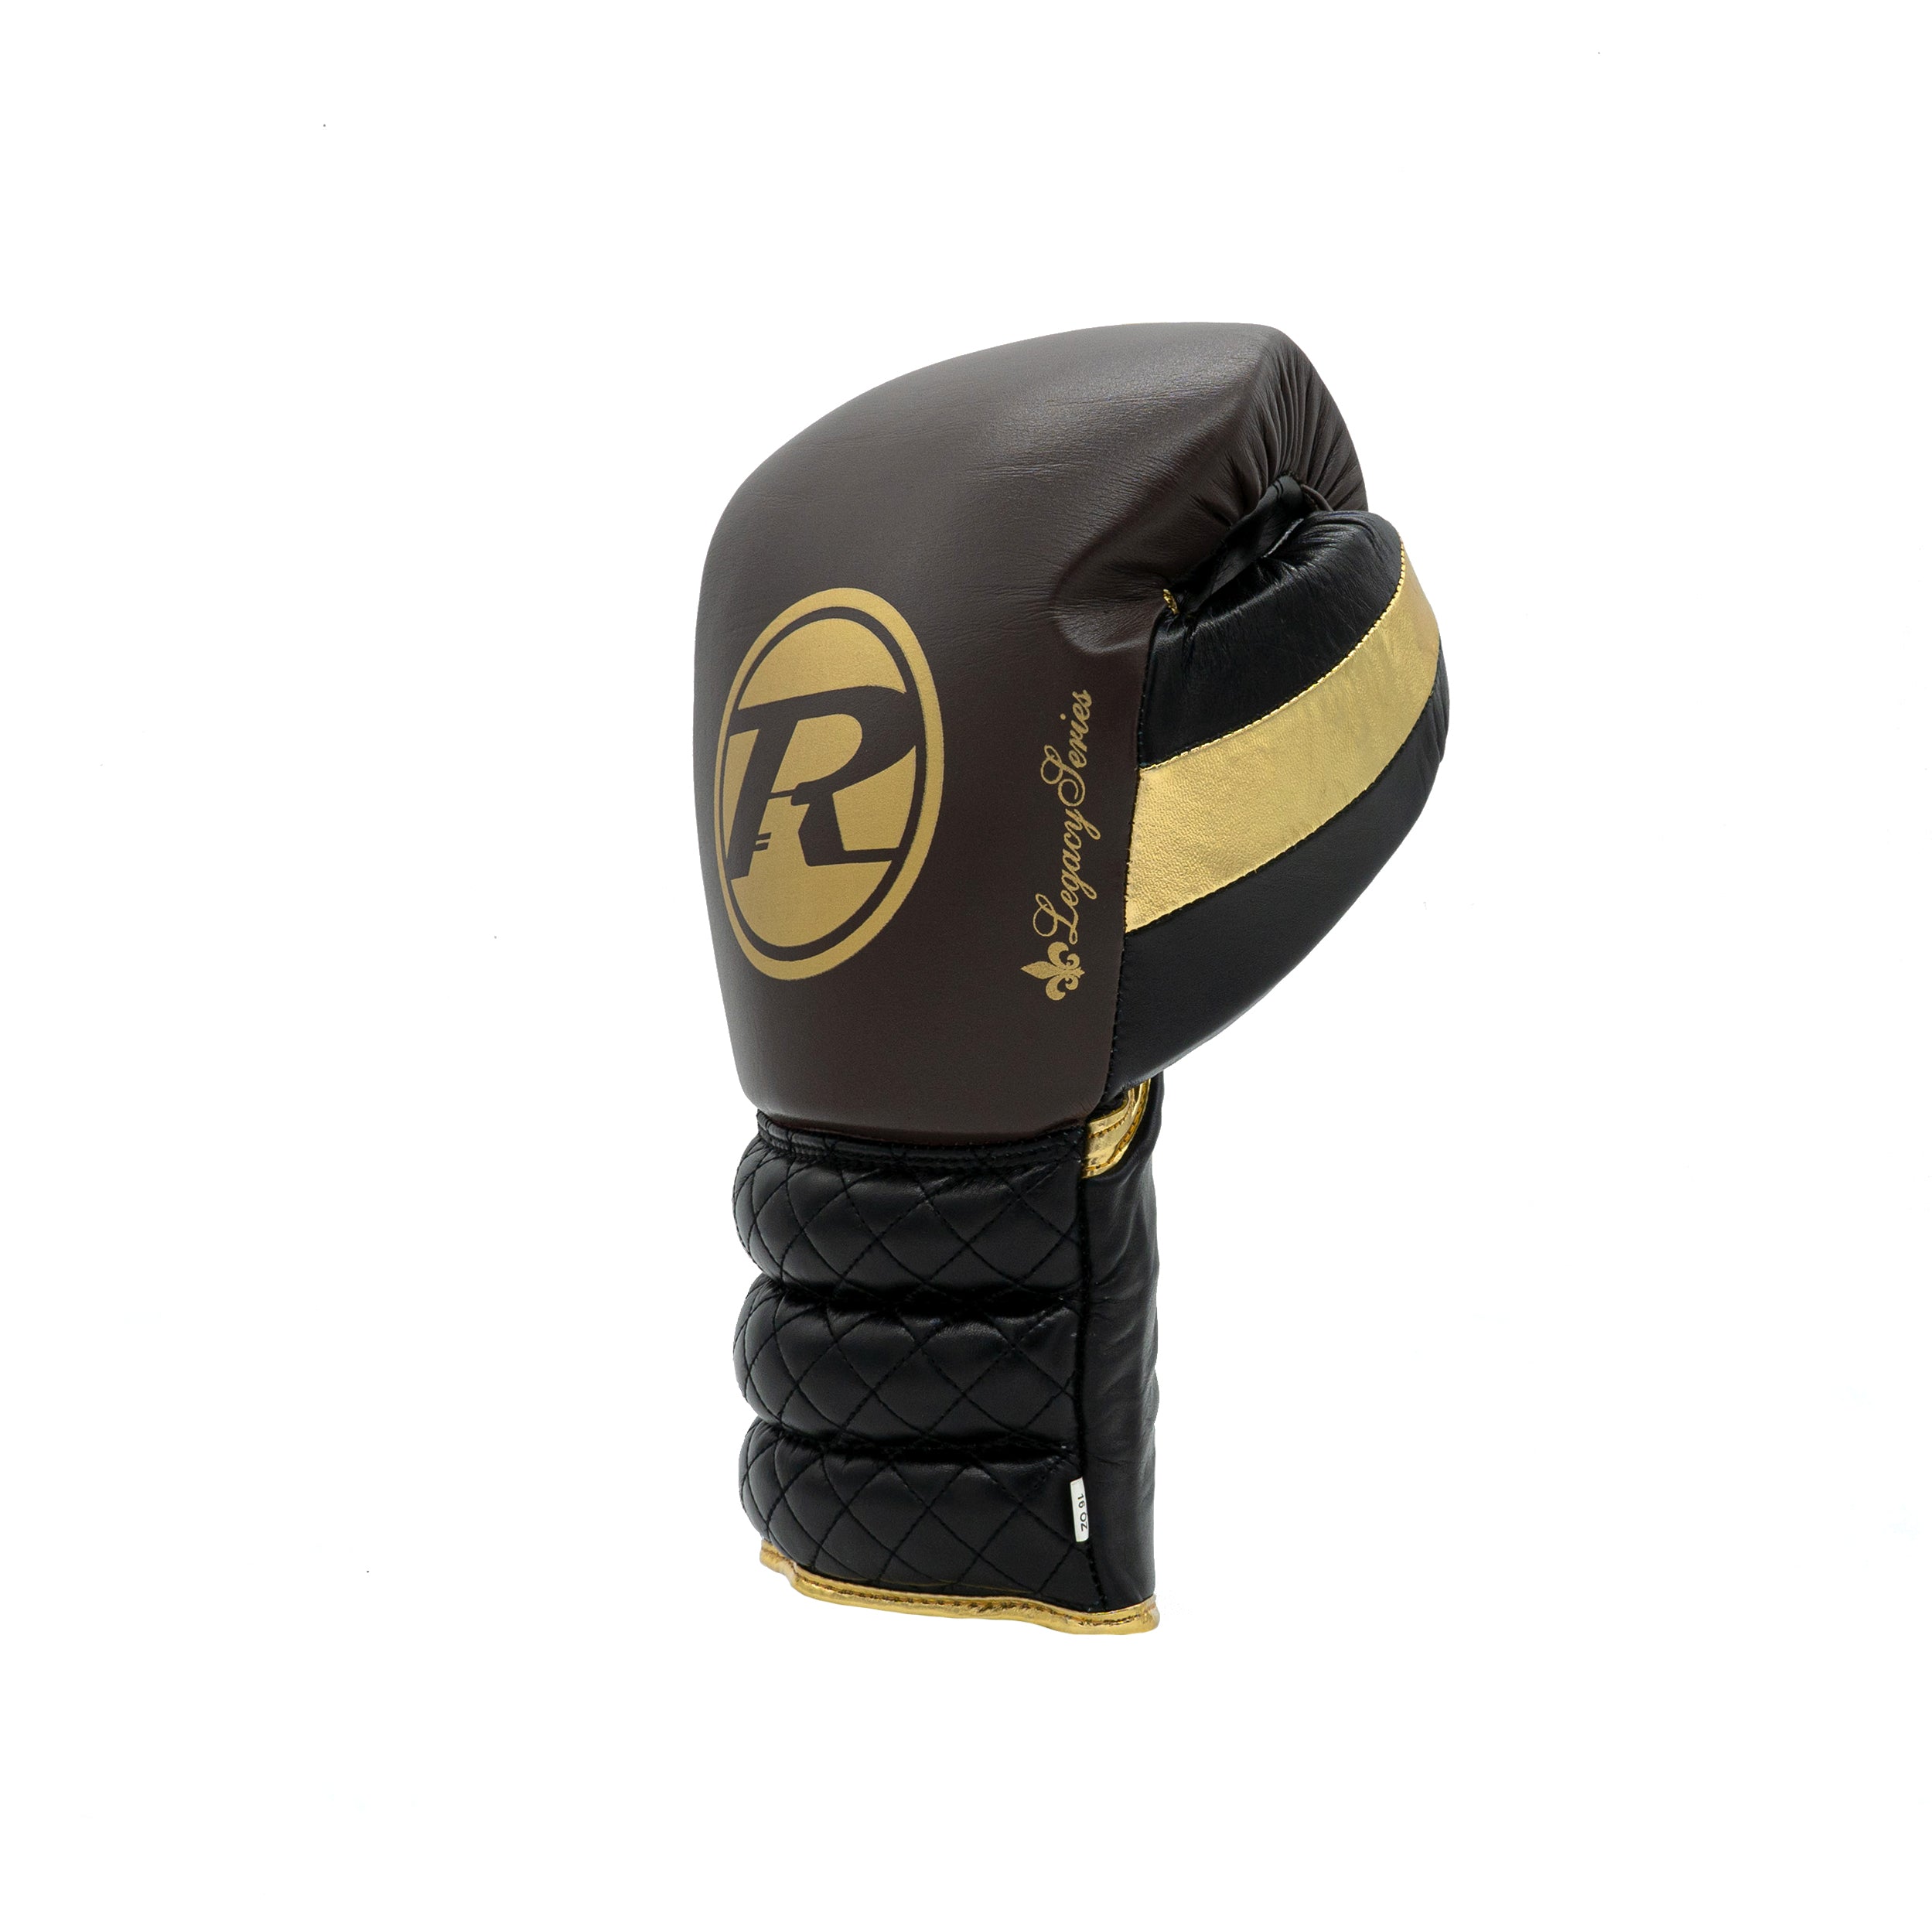 Ringside Boxing Legacy Series Lace Boxing Gloves in brown on white background side angle